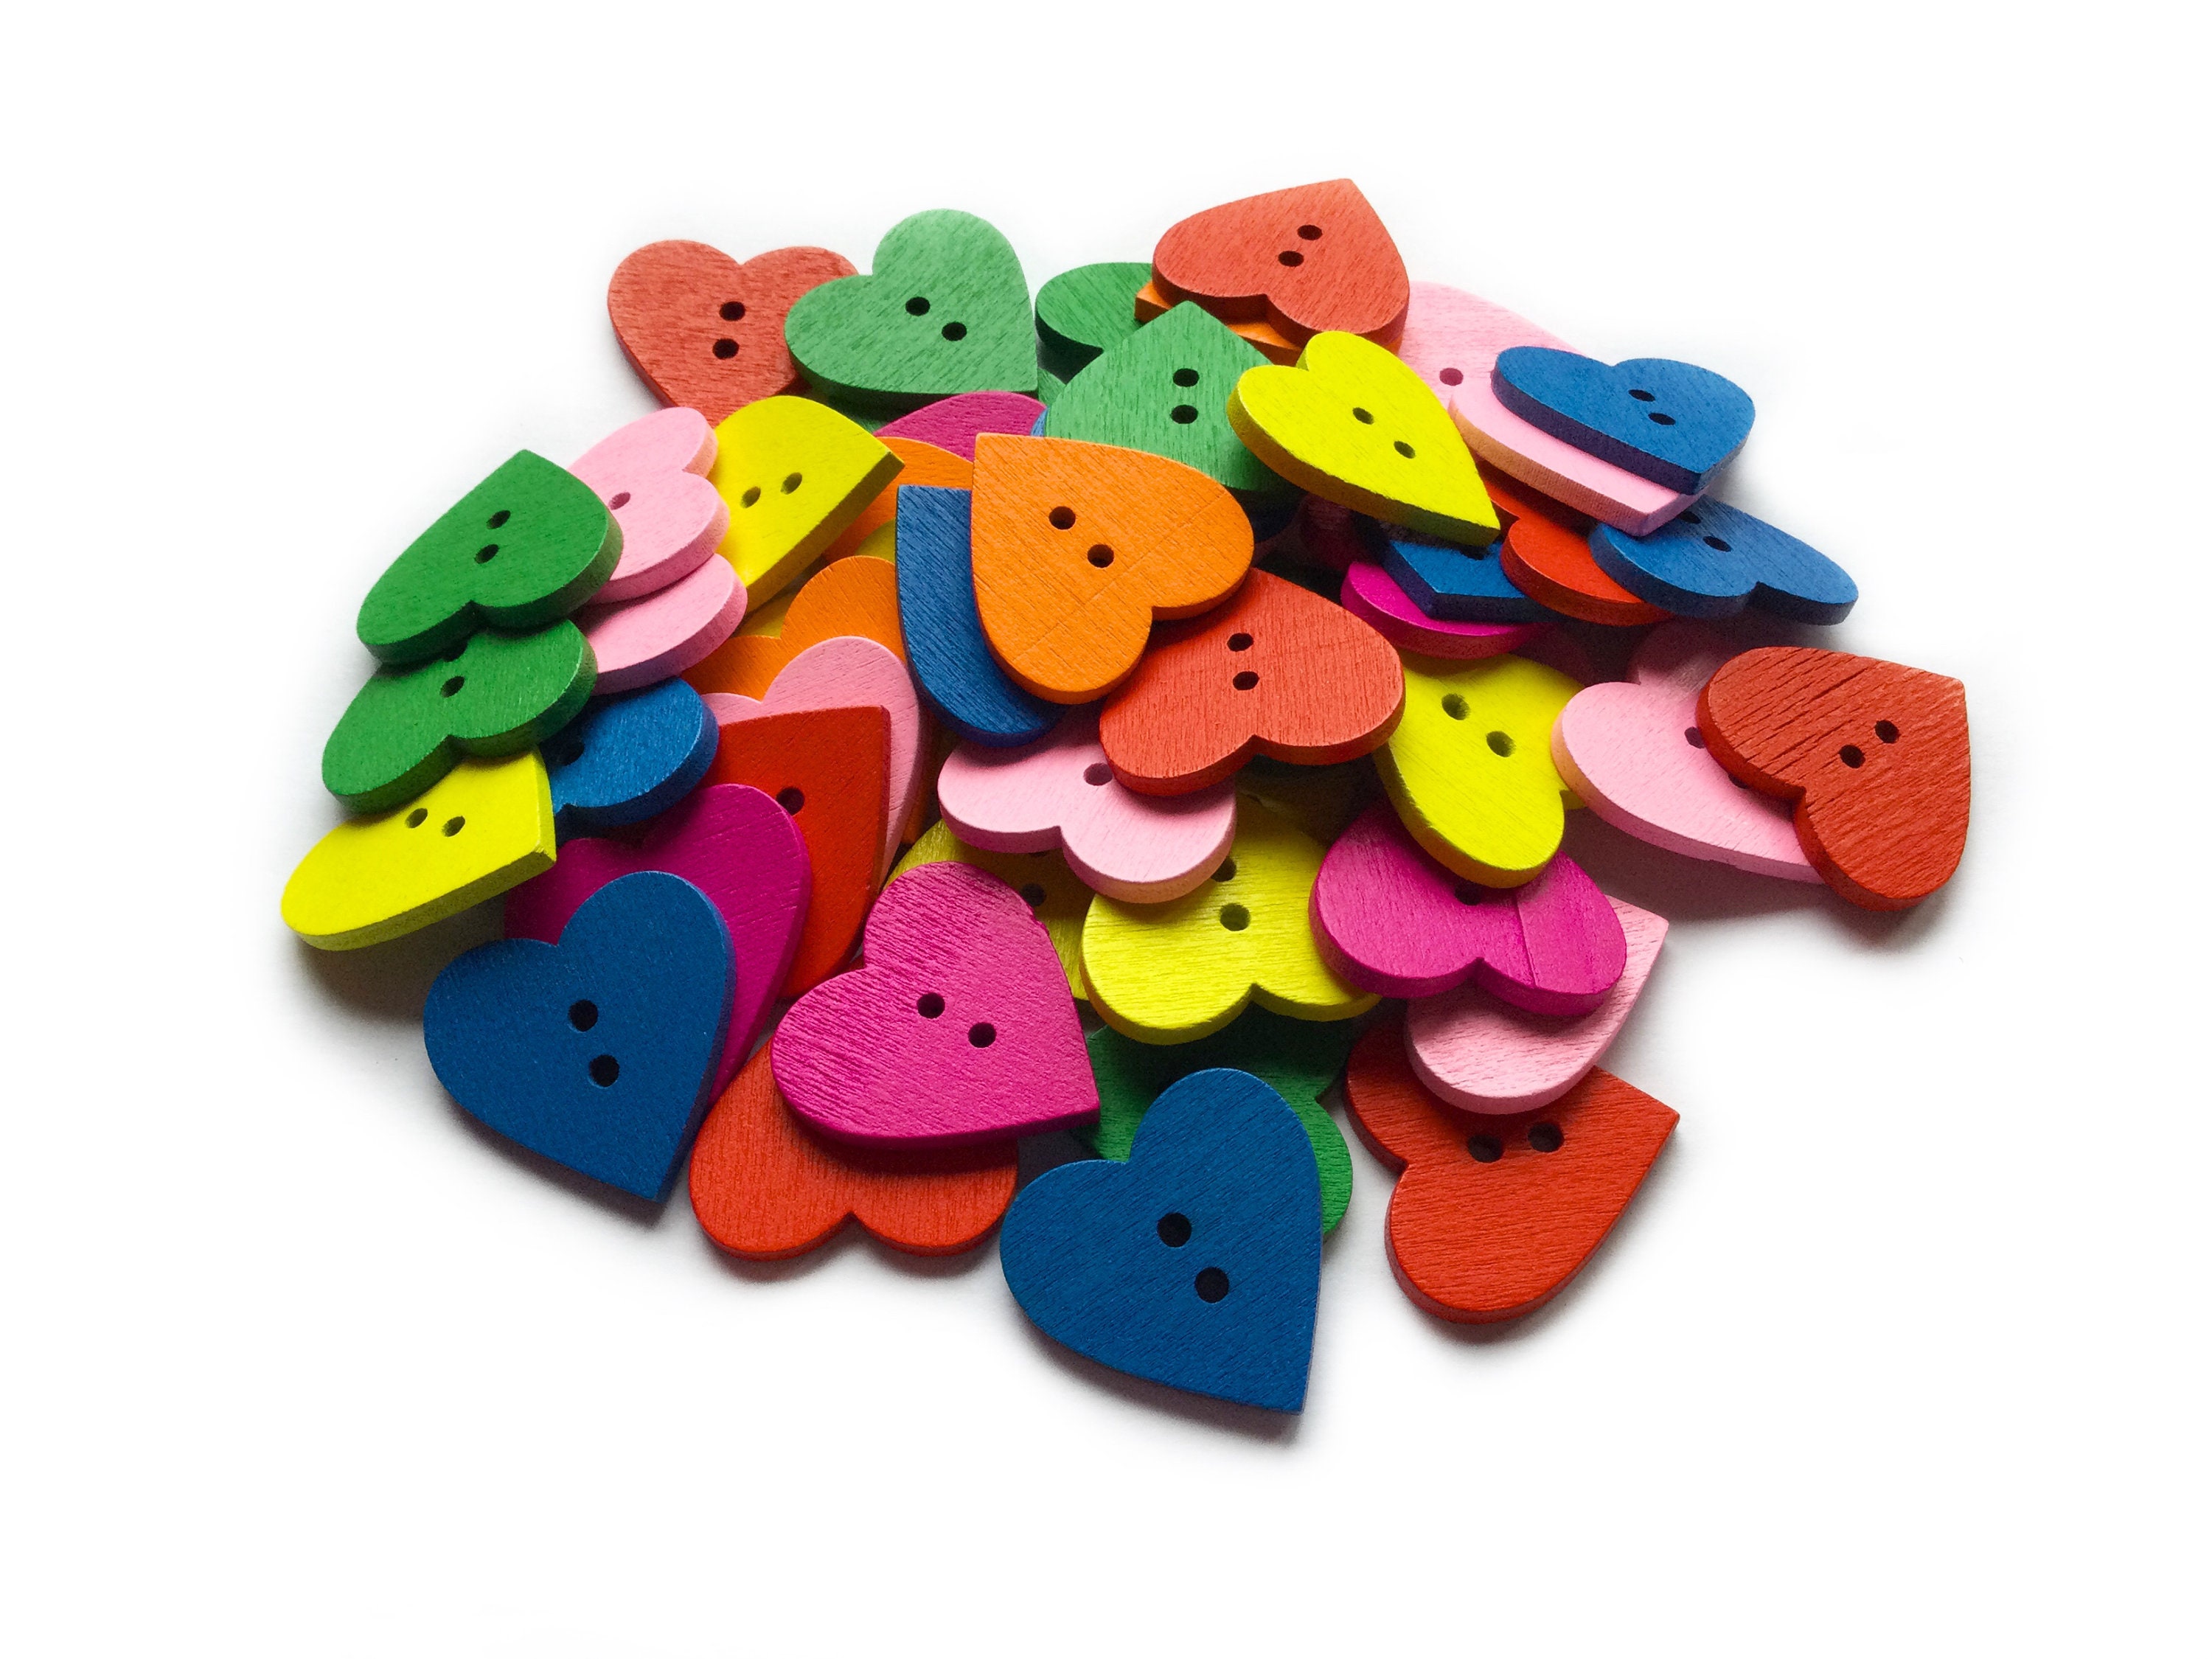 Meetppy Guzon 200pcs 14mm Heart Shaped Multicolor 2 Holes Plastic Sewing Buttons for Sewing Scrapbooking Knitting